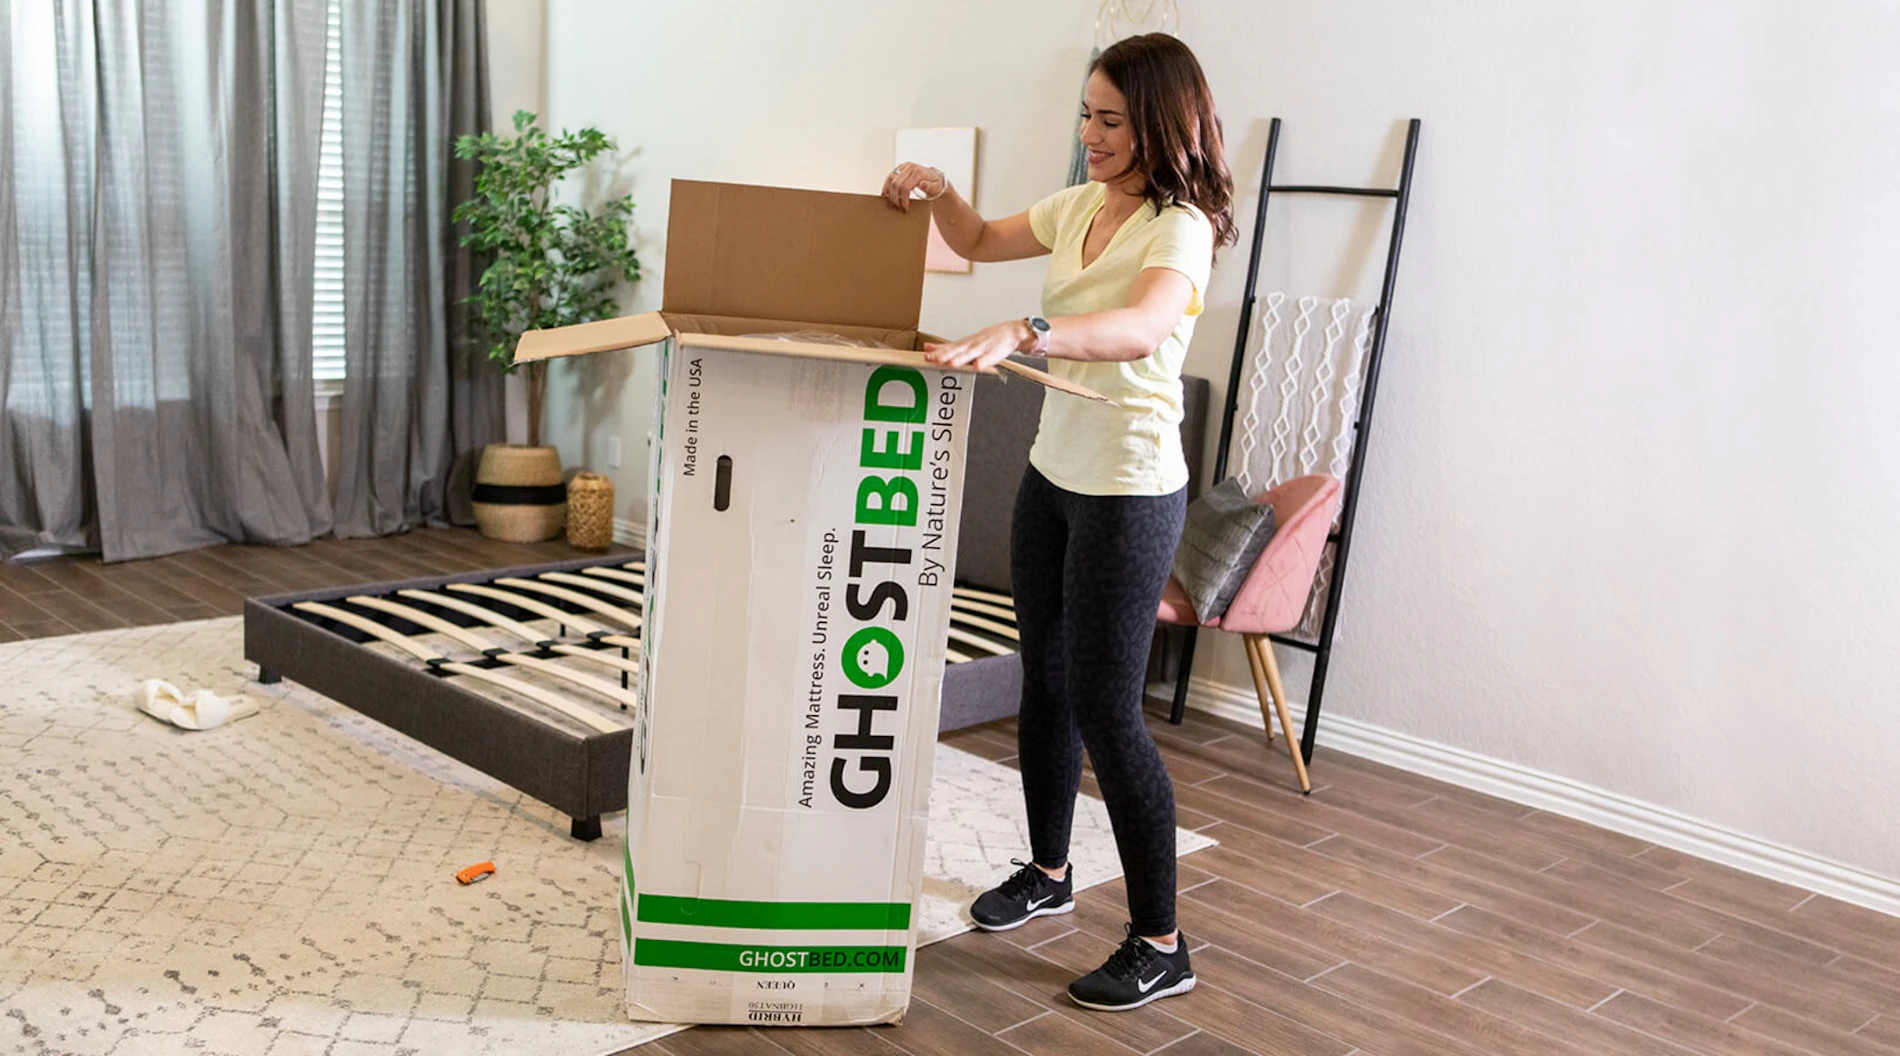 All of GhostBed's mattresses are vacuum sealed and delivered in convenient boxes.